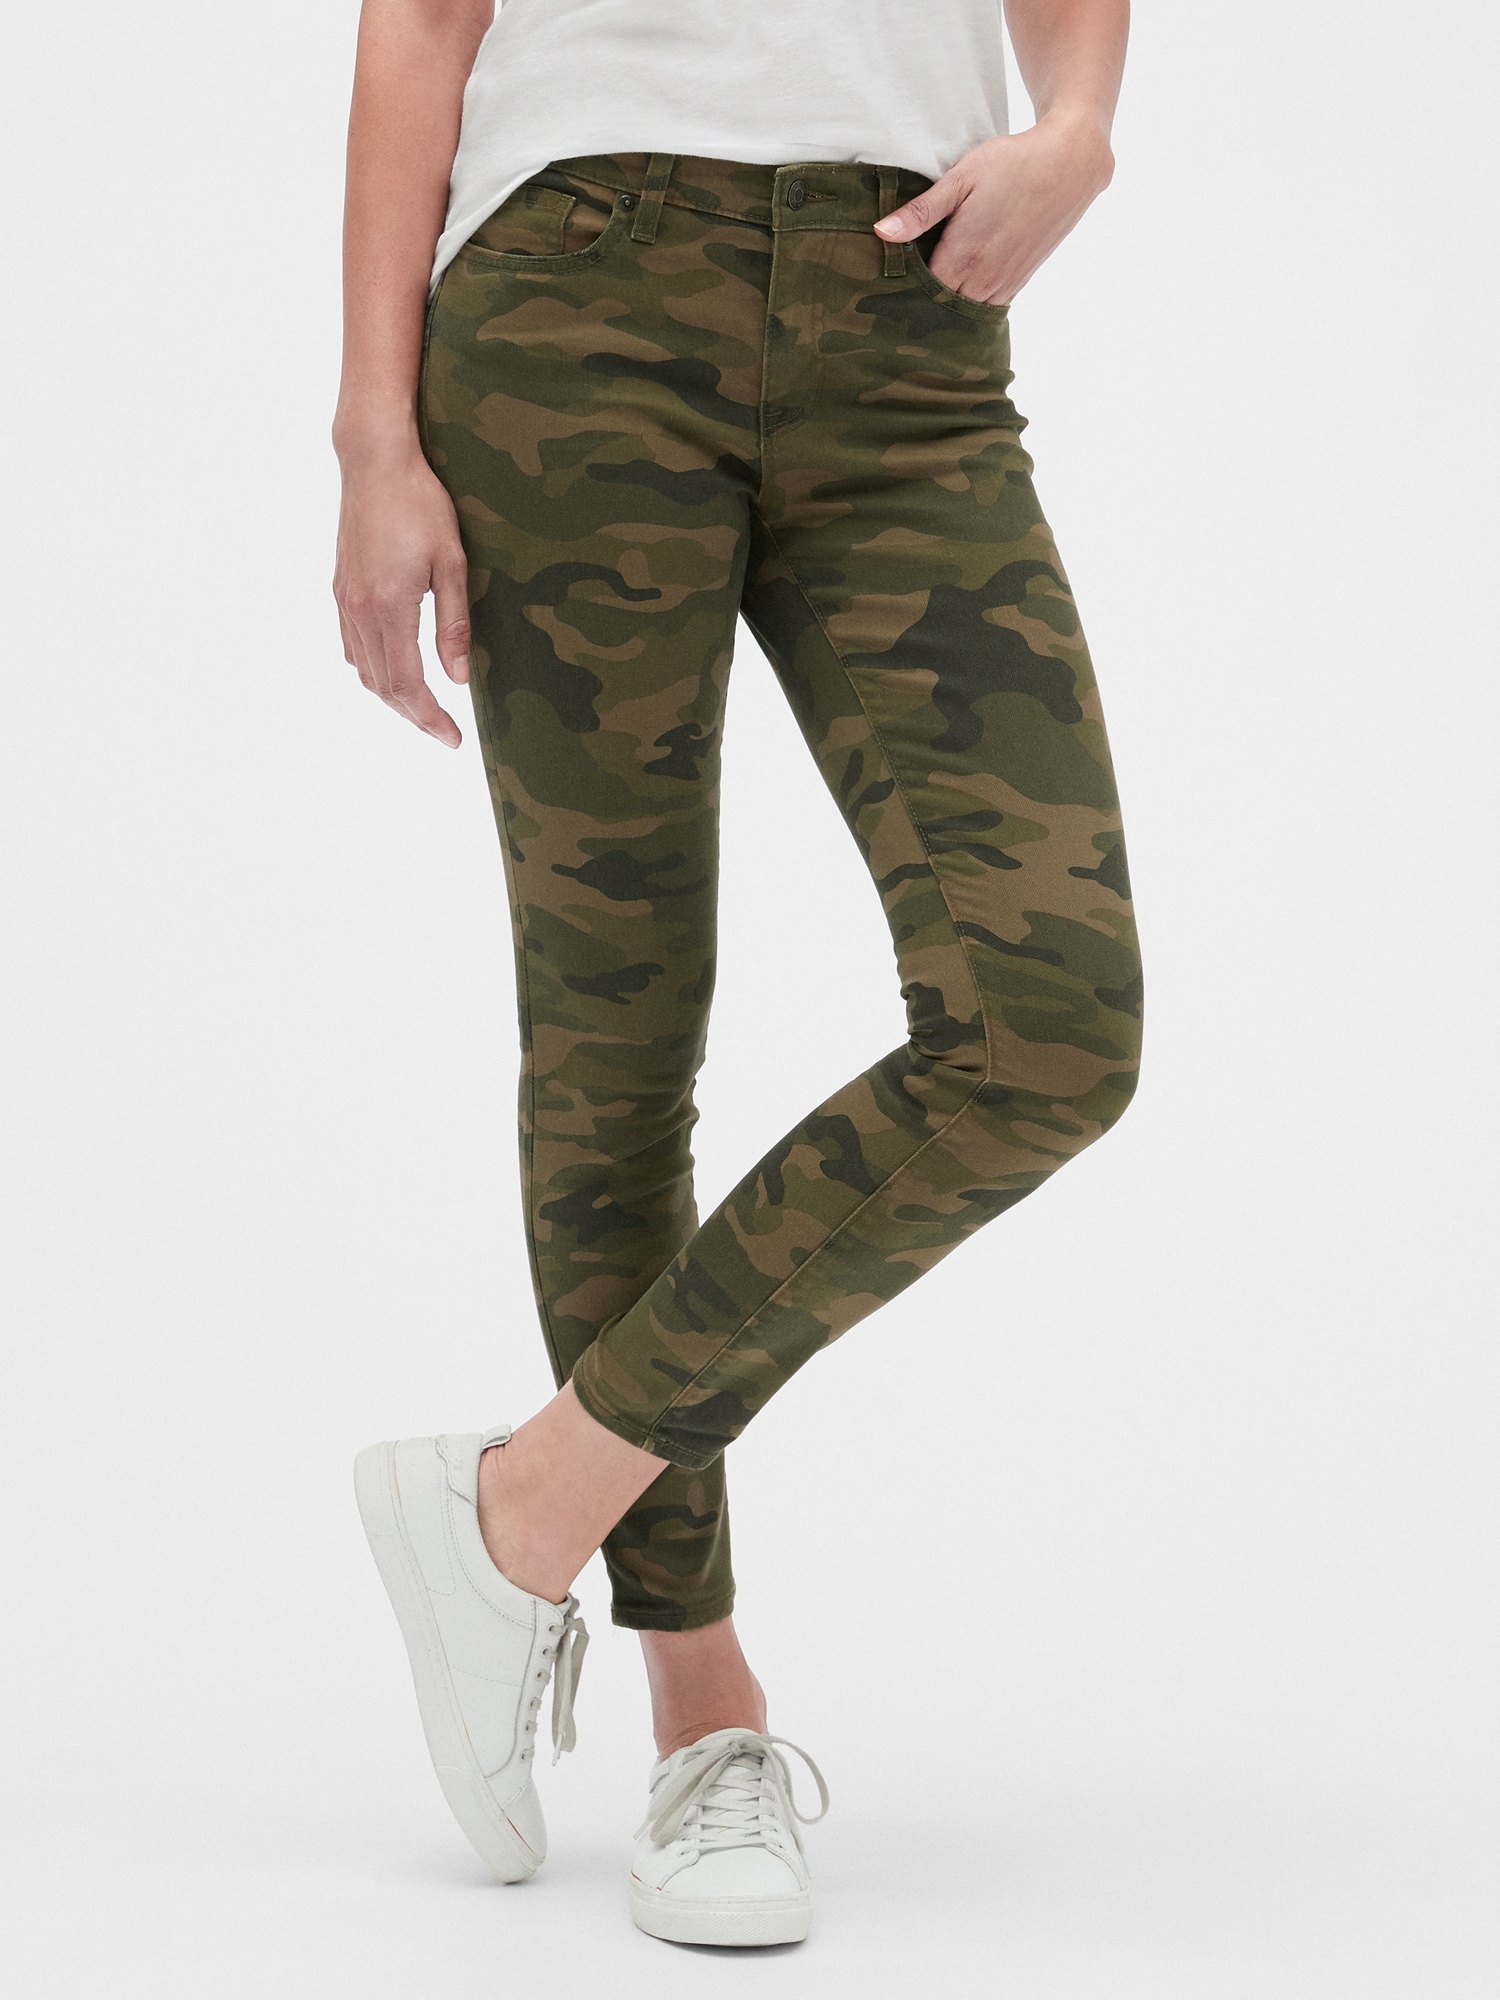 gap camouflage jeans